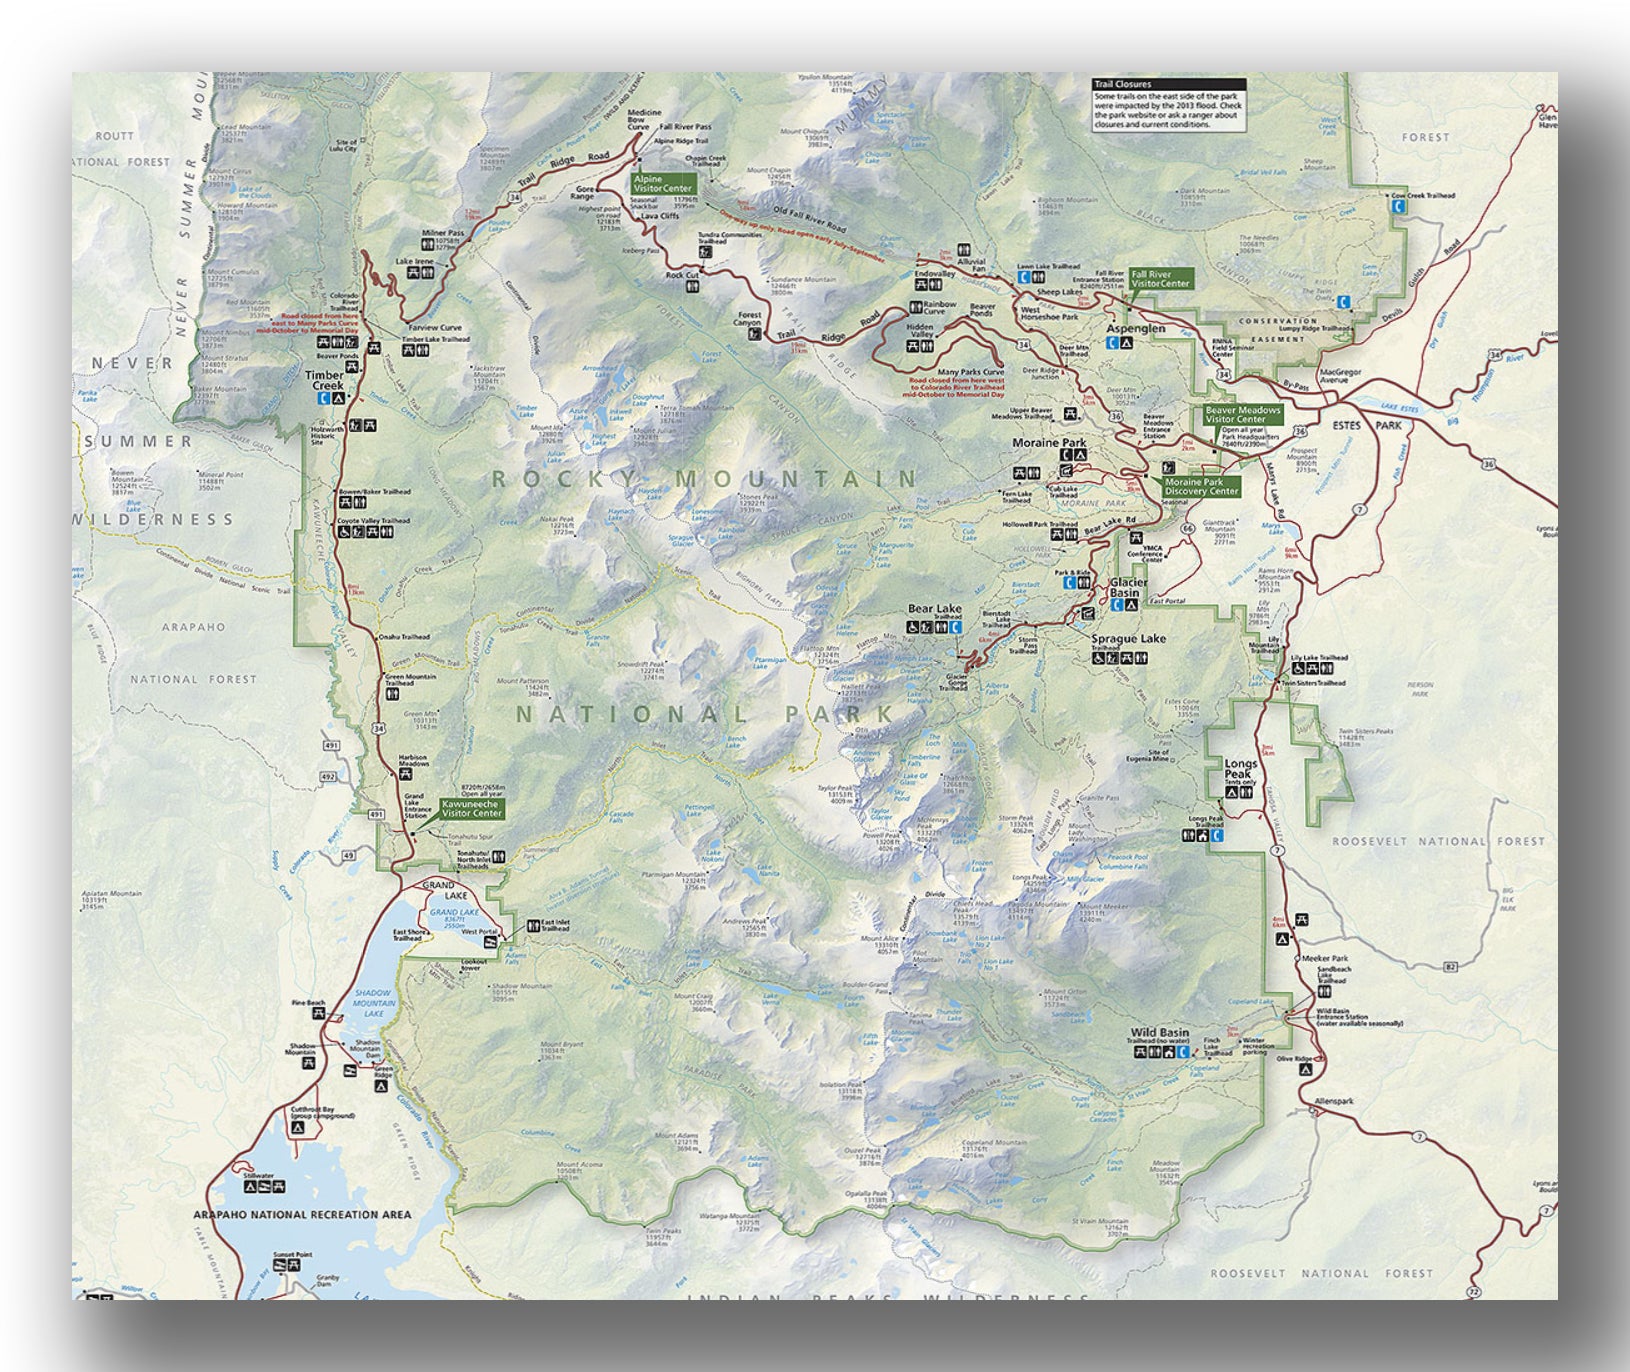 Rocky Mountain National Park map